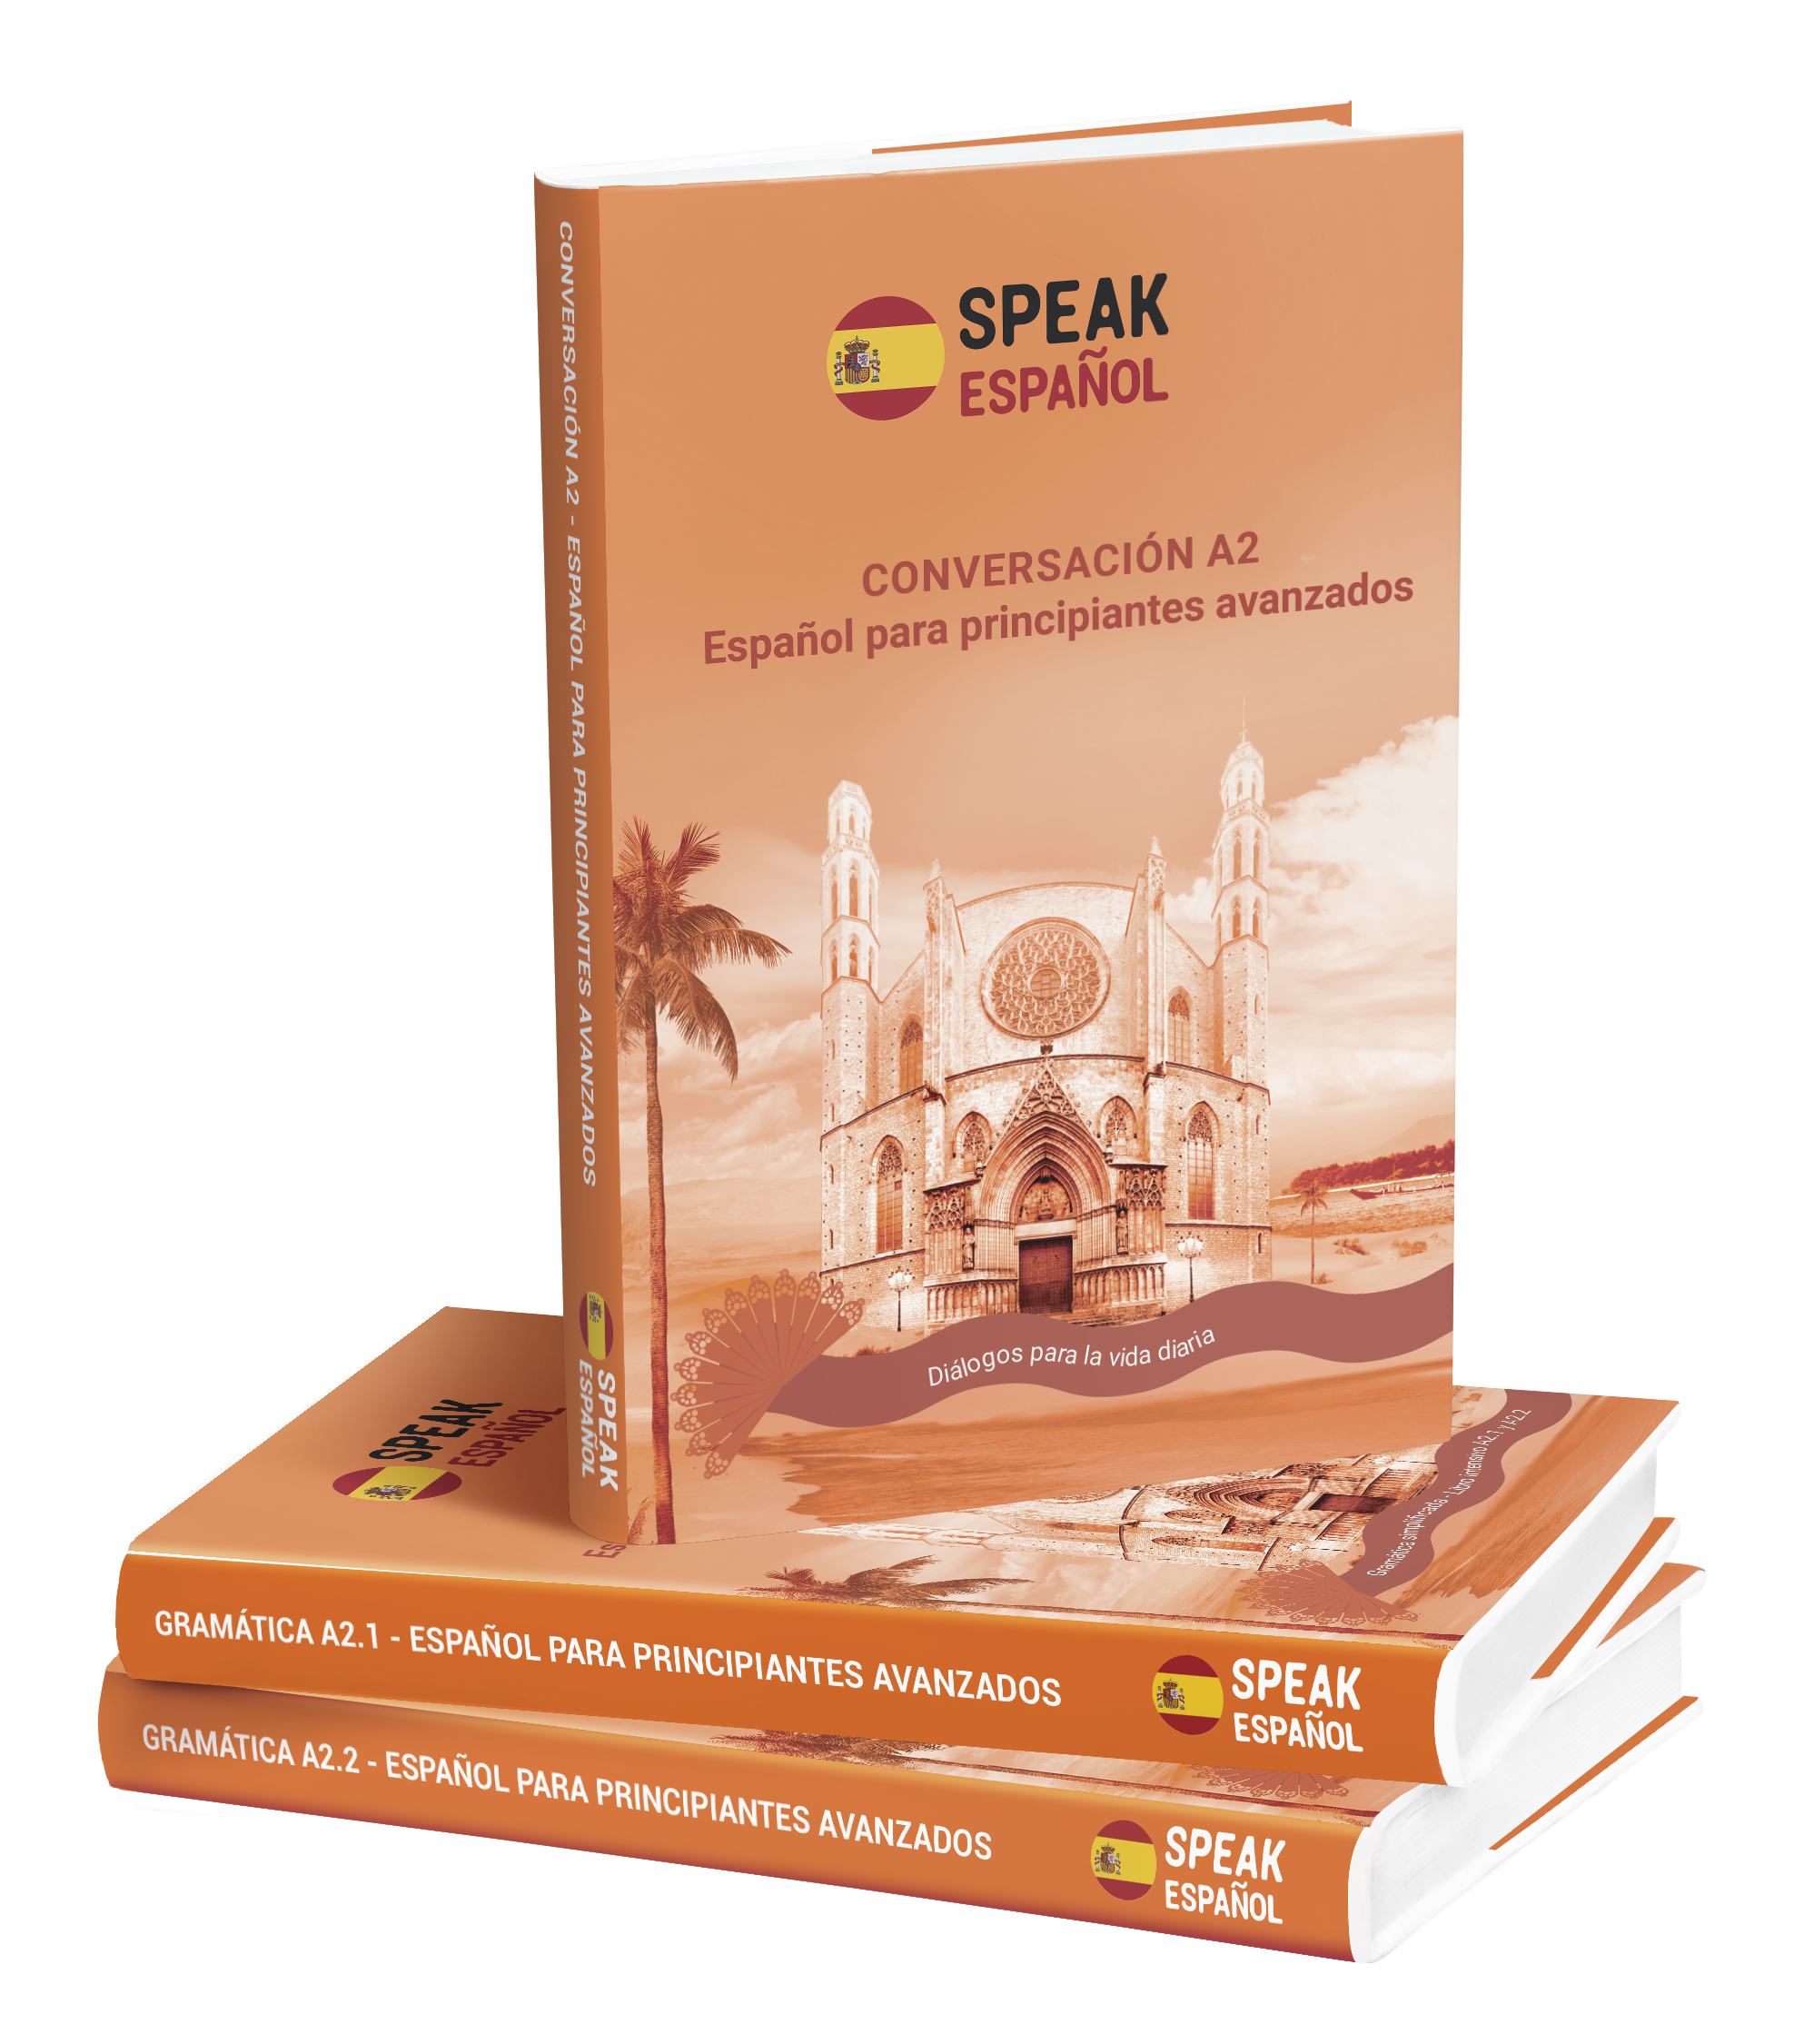 A2 level Spanish books included in the course price